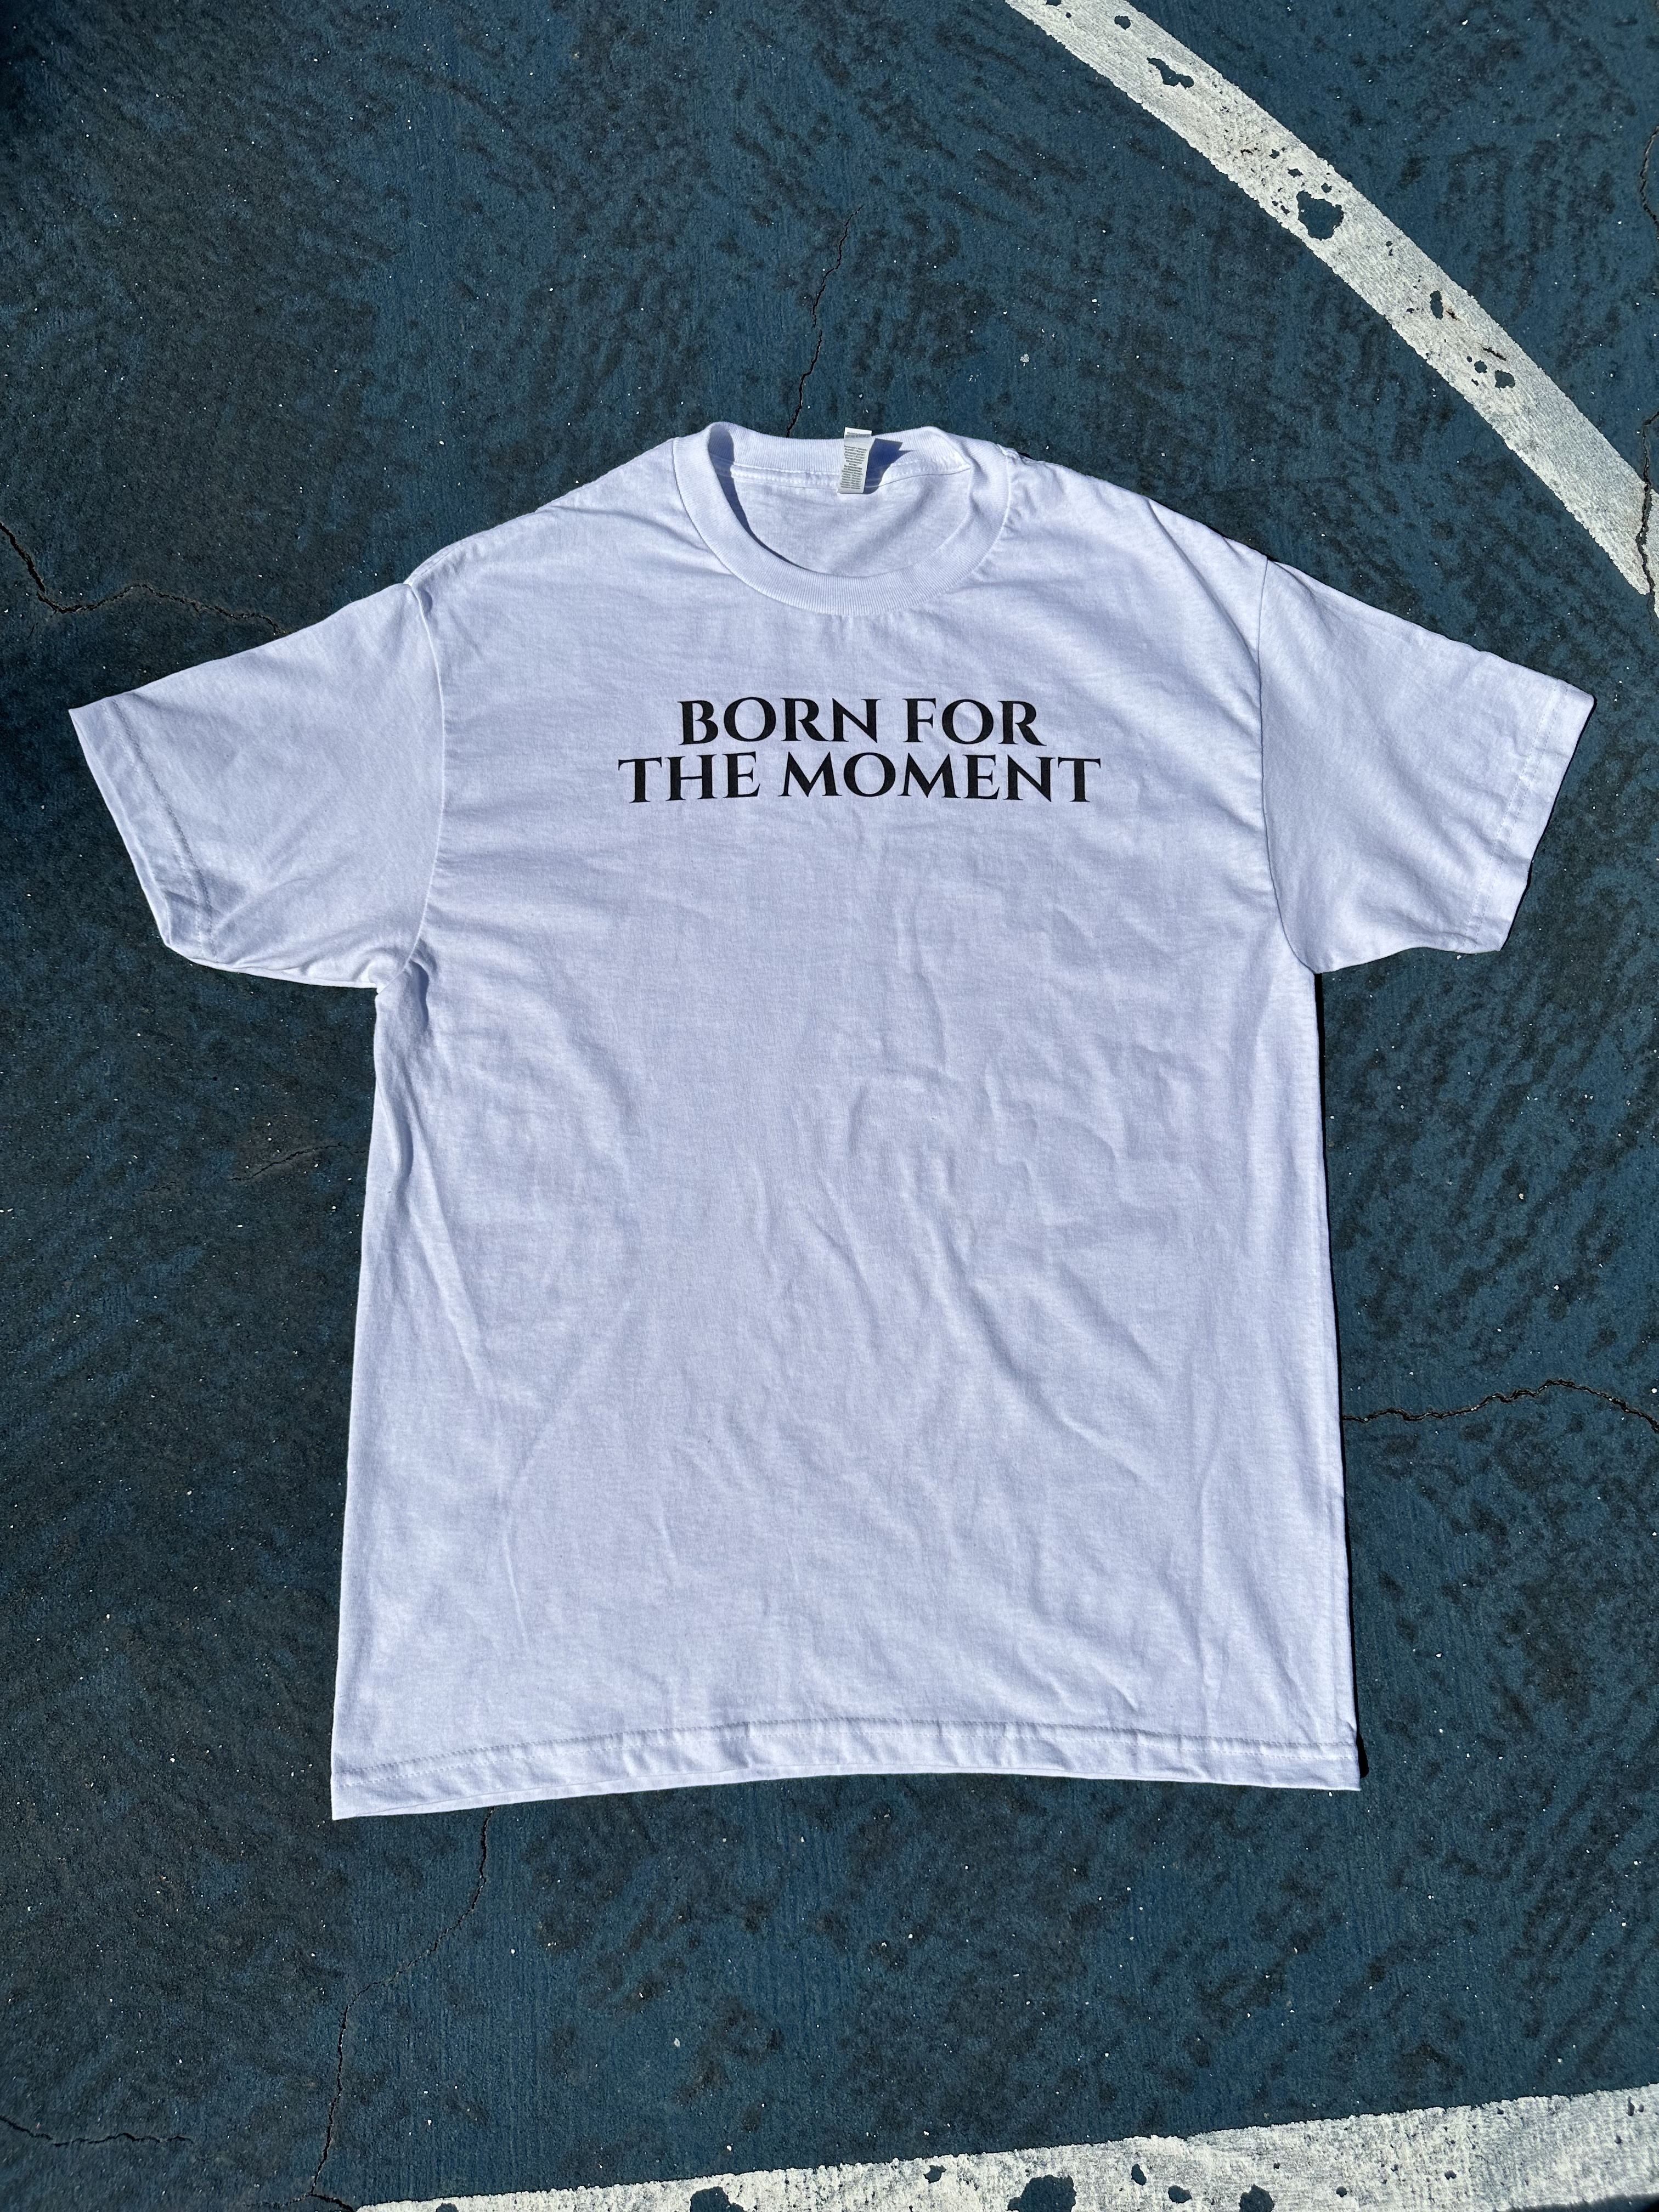 Born for the Moment Shirt